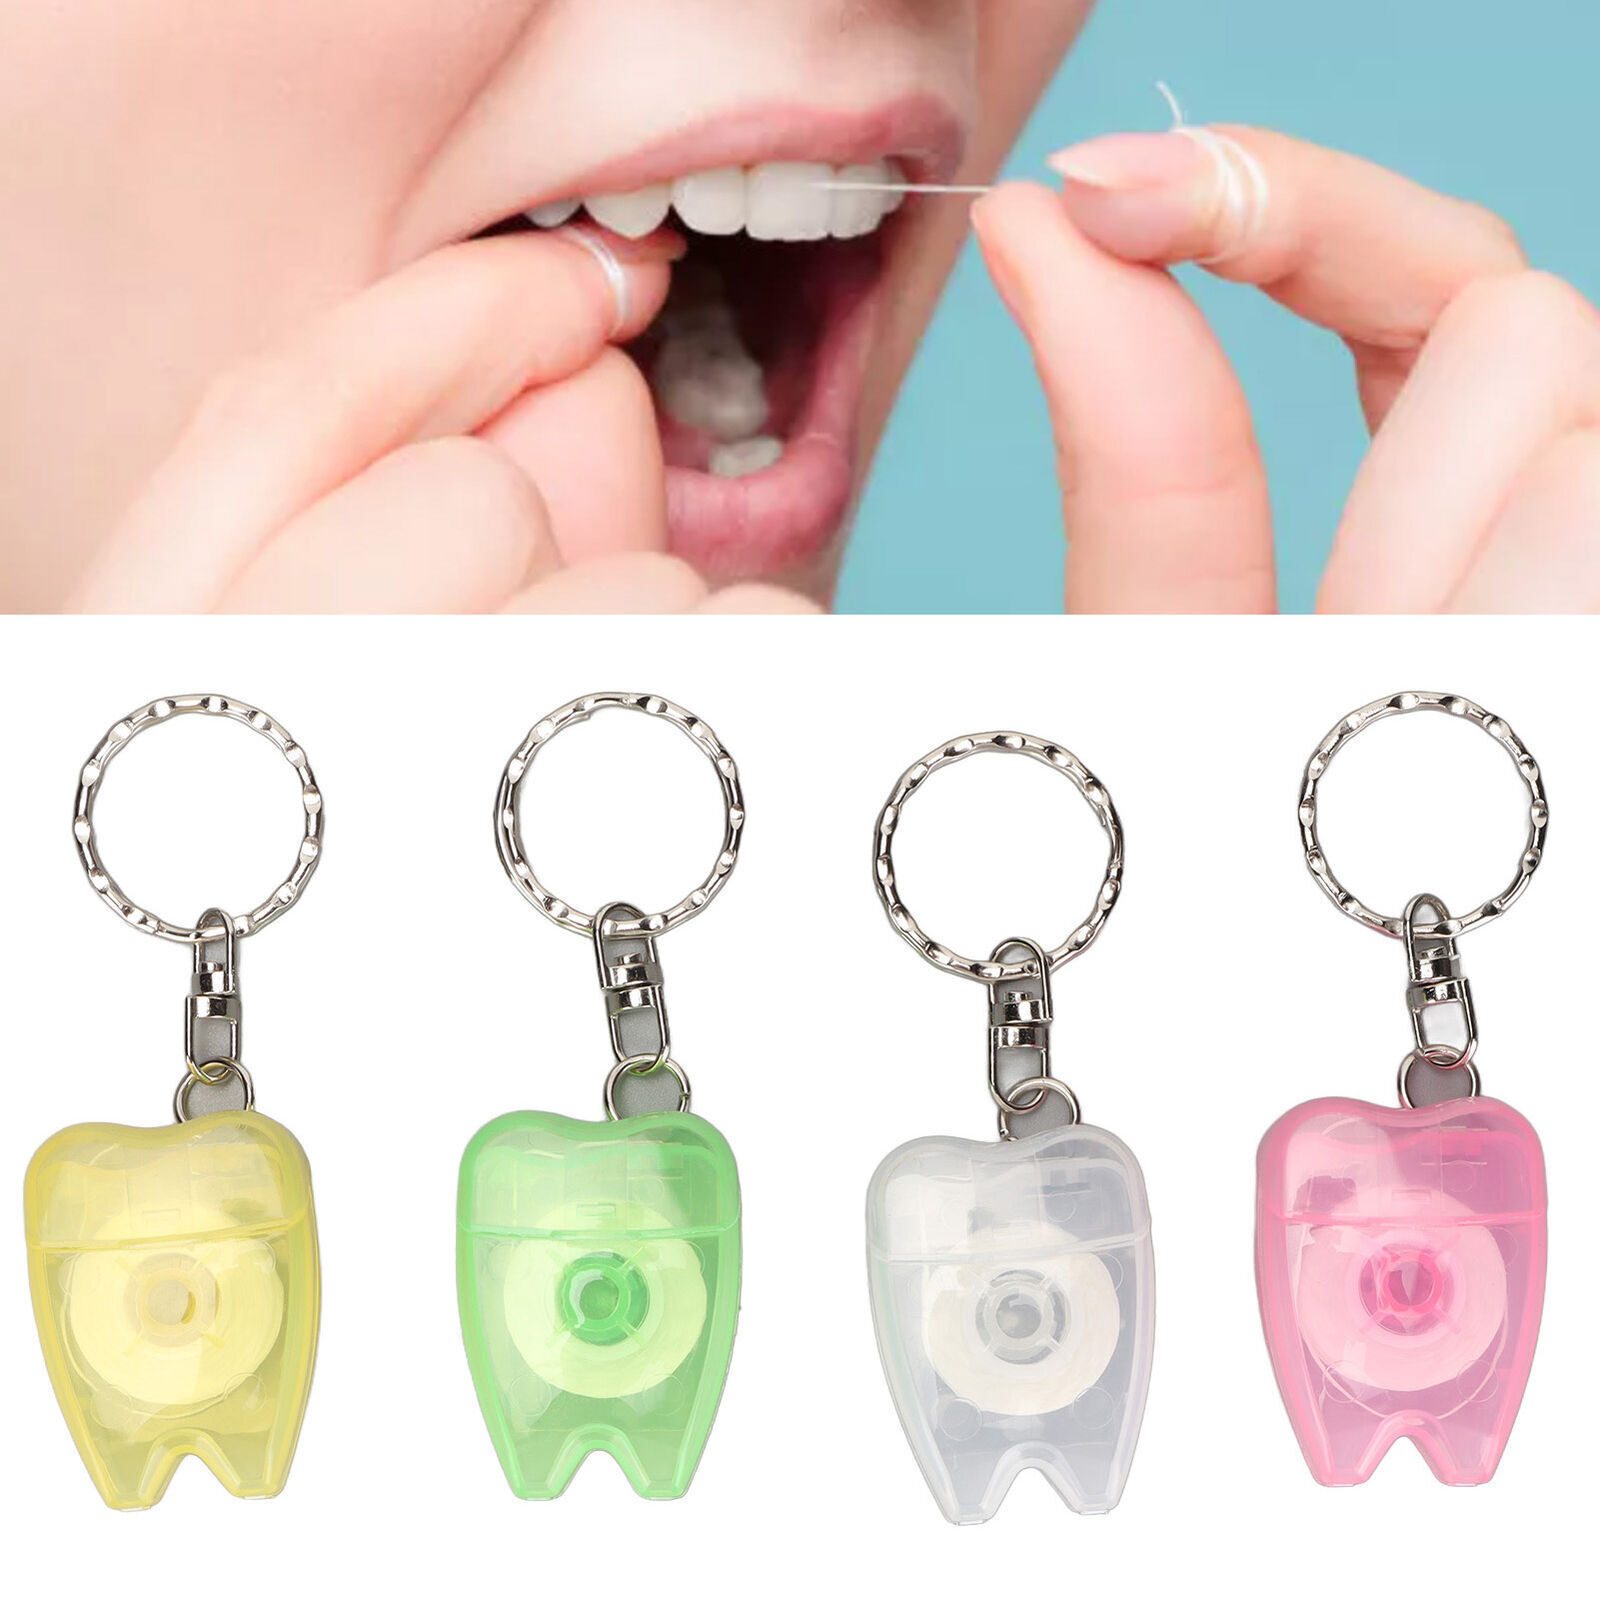 Cleaning Flosser Keychain Portable Oral Care Teeth Cleaner with Tooth Shape Box